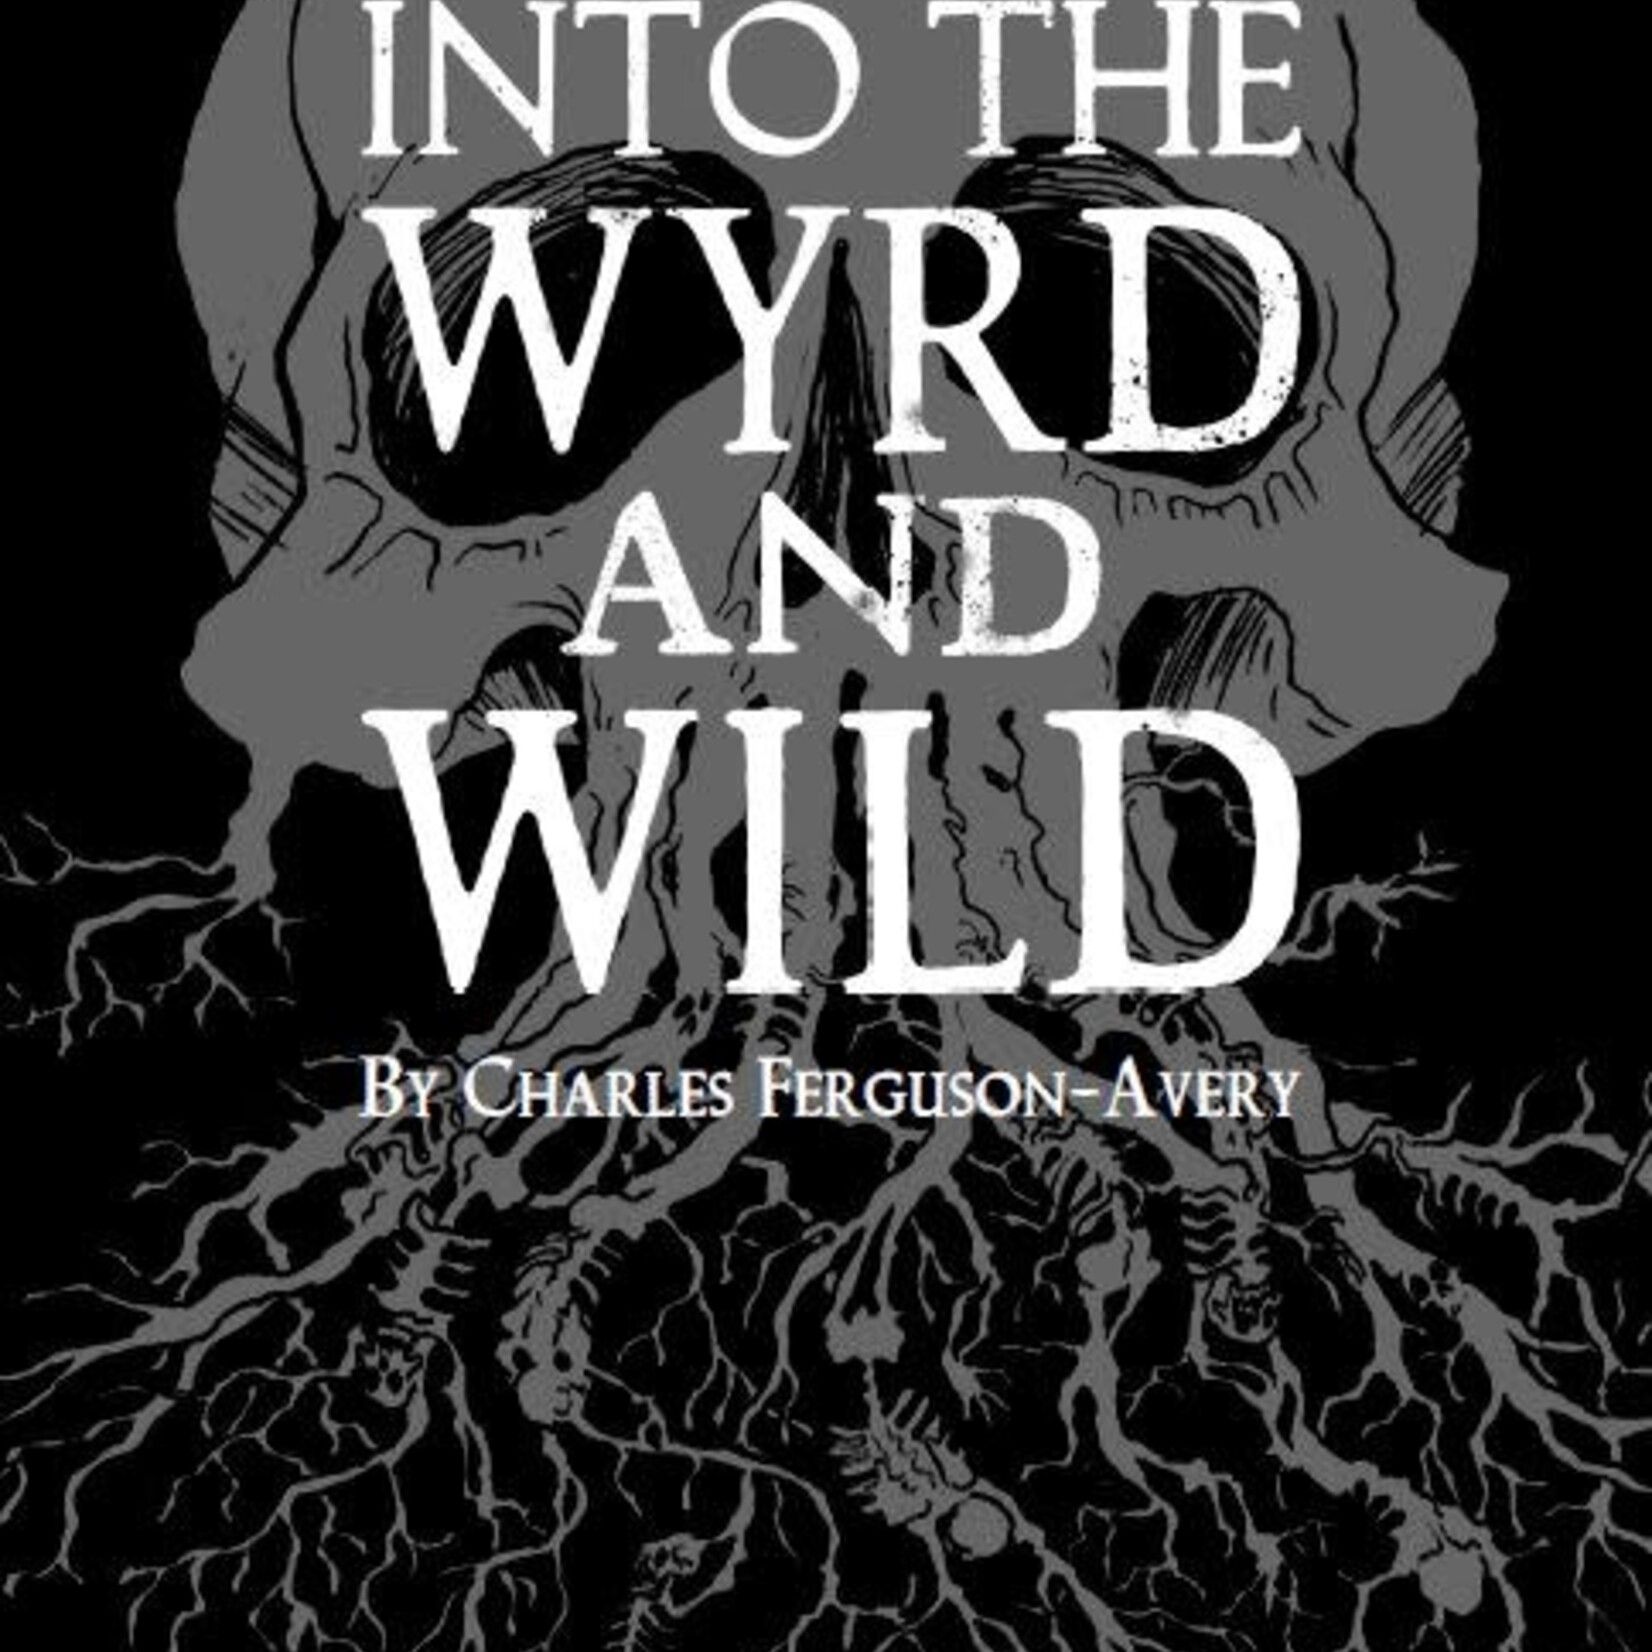 Indie Press Revolution Into the Wyrd and Wild